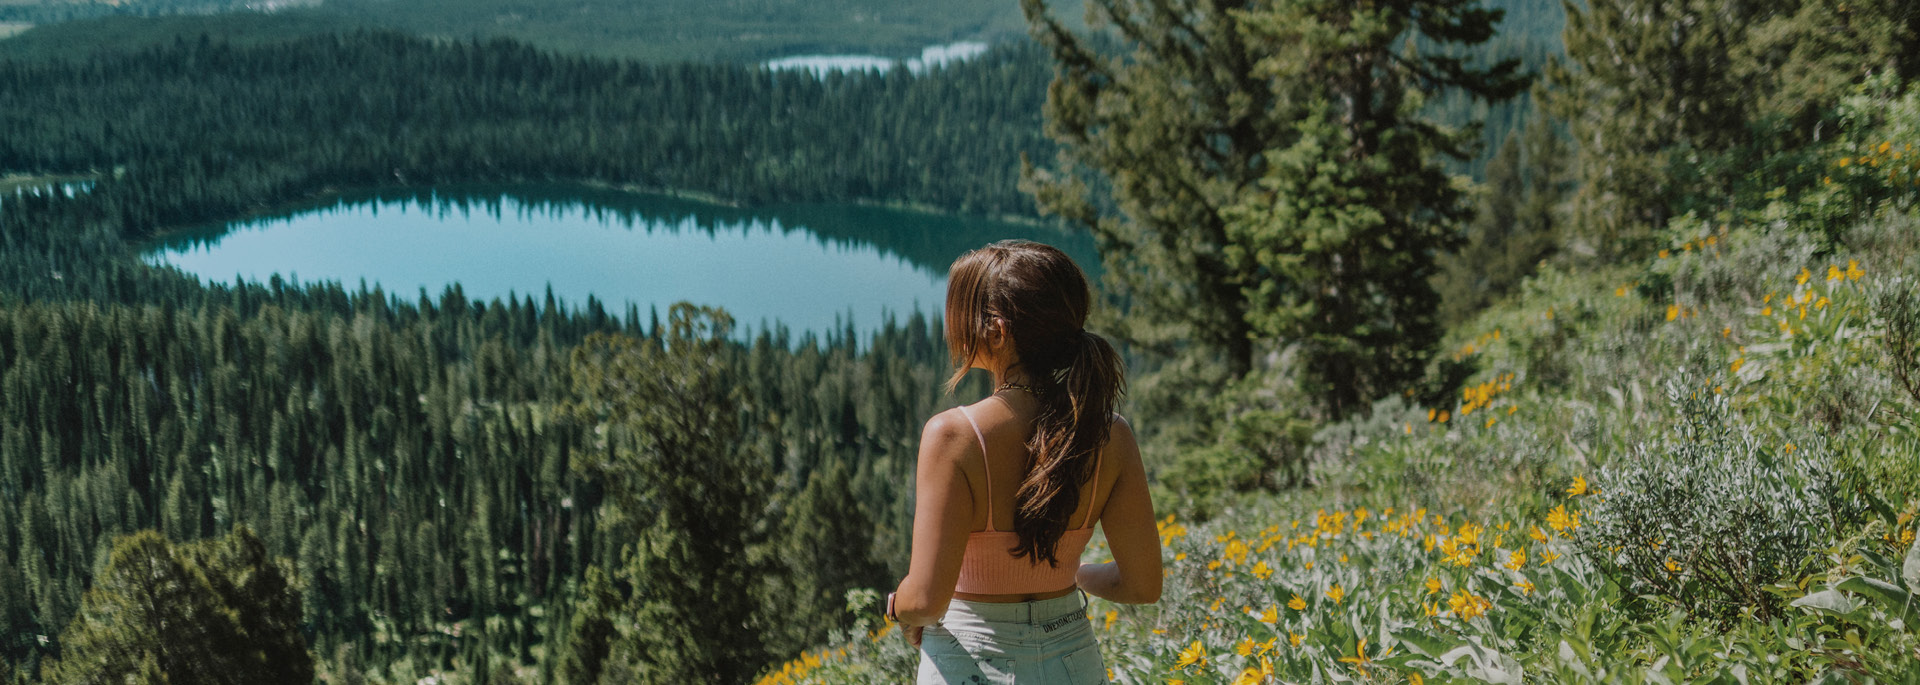 woman at a top of a mountain looking down at trees and a lake